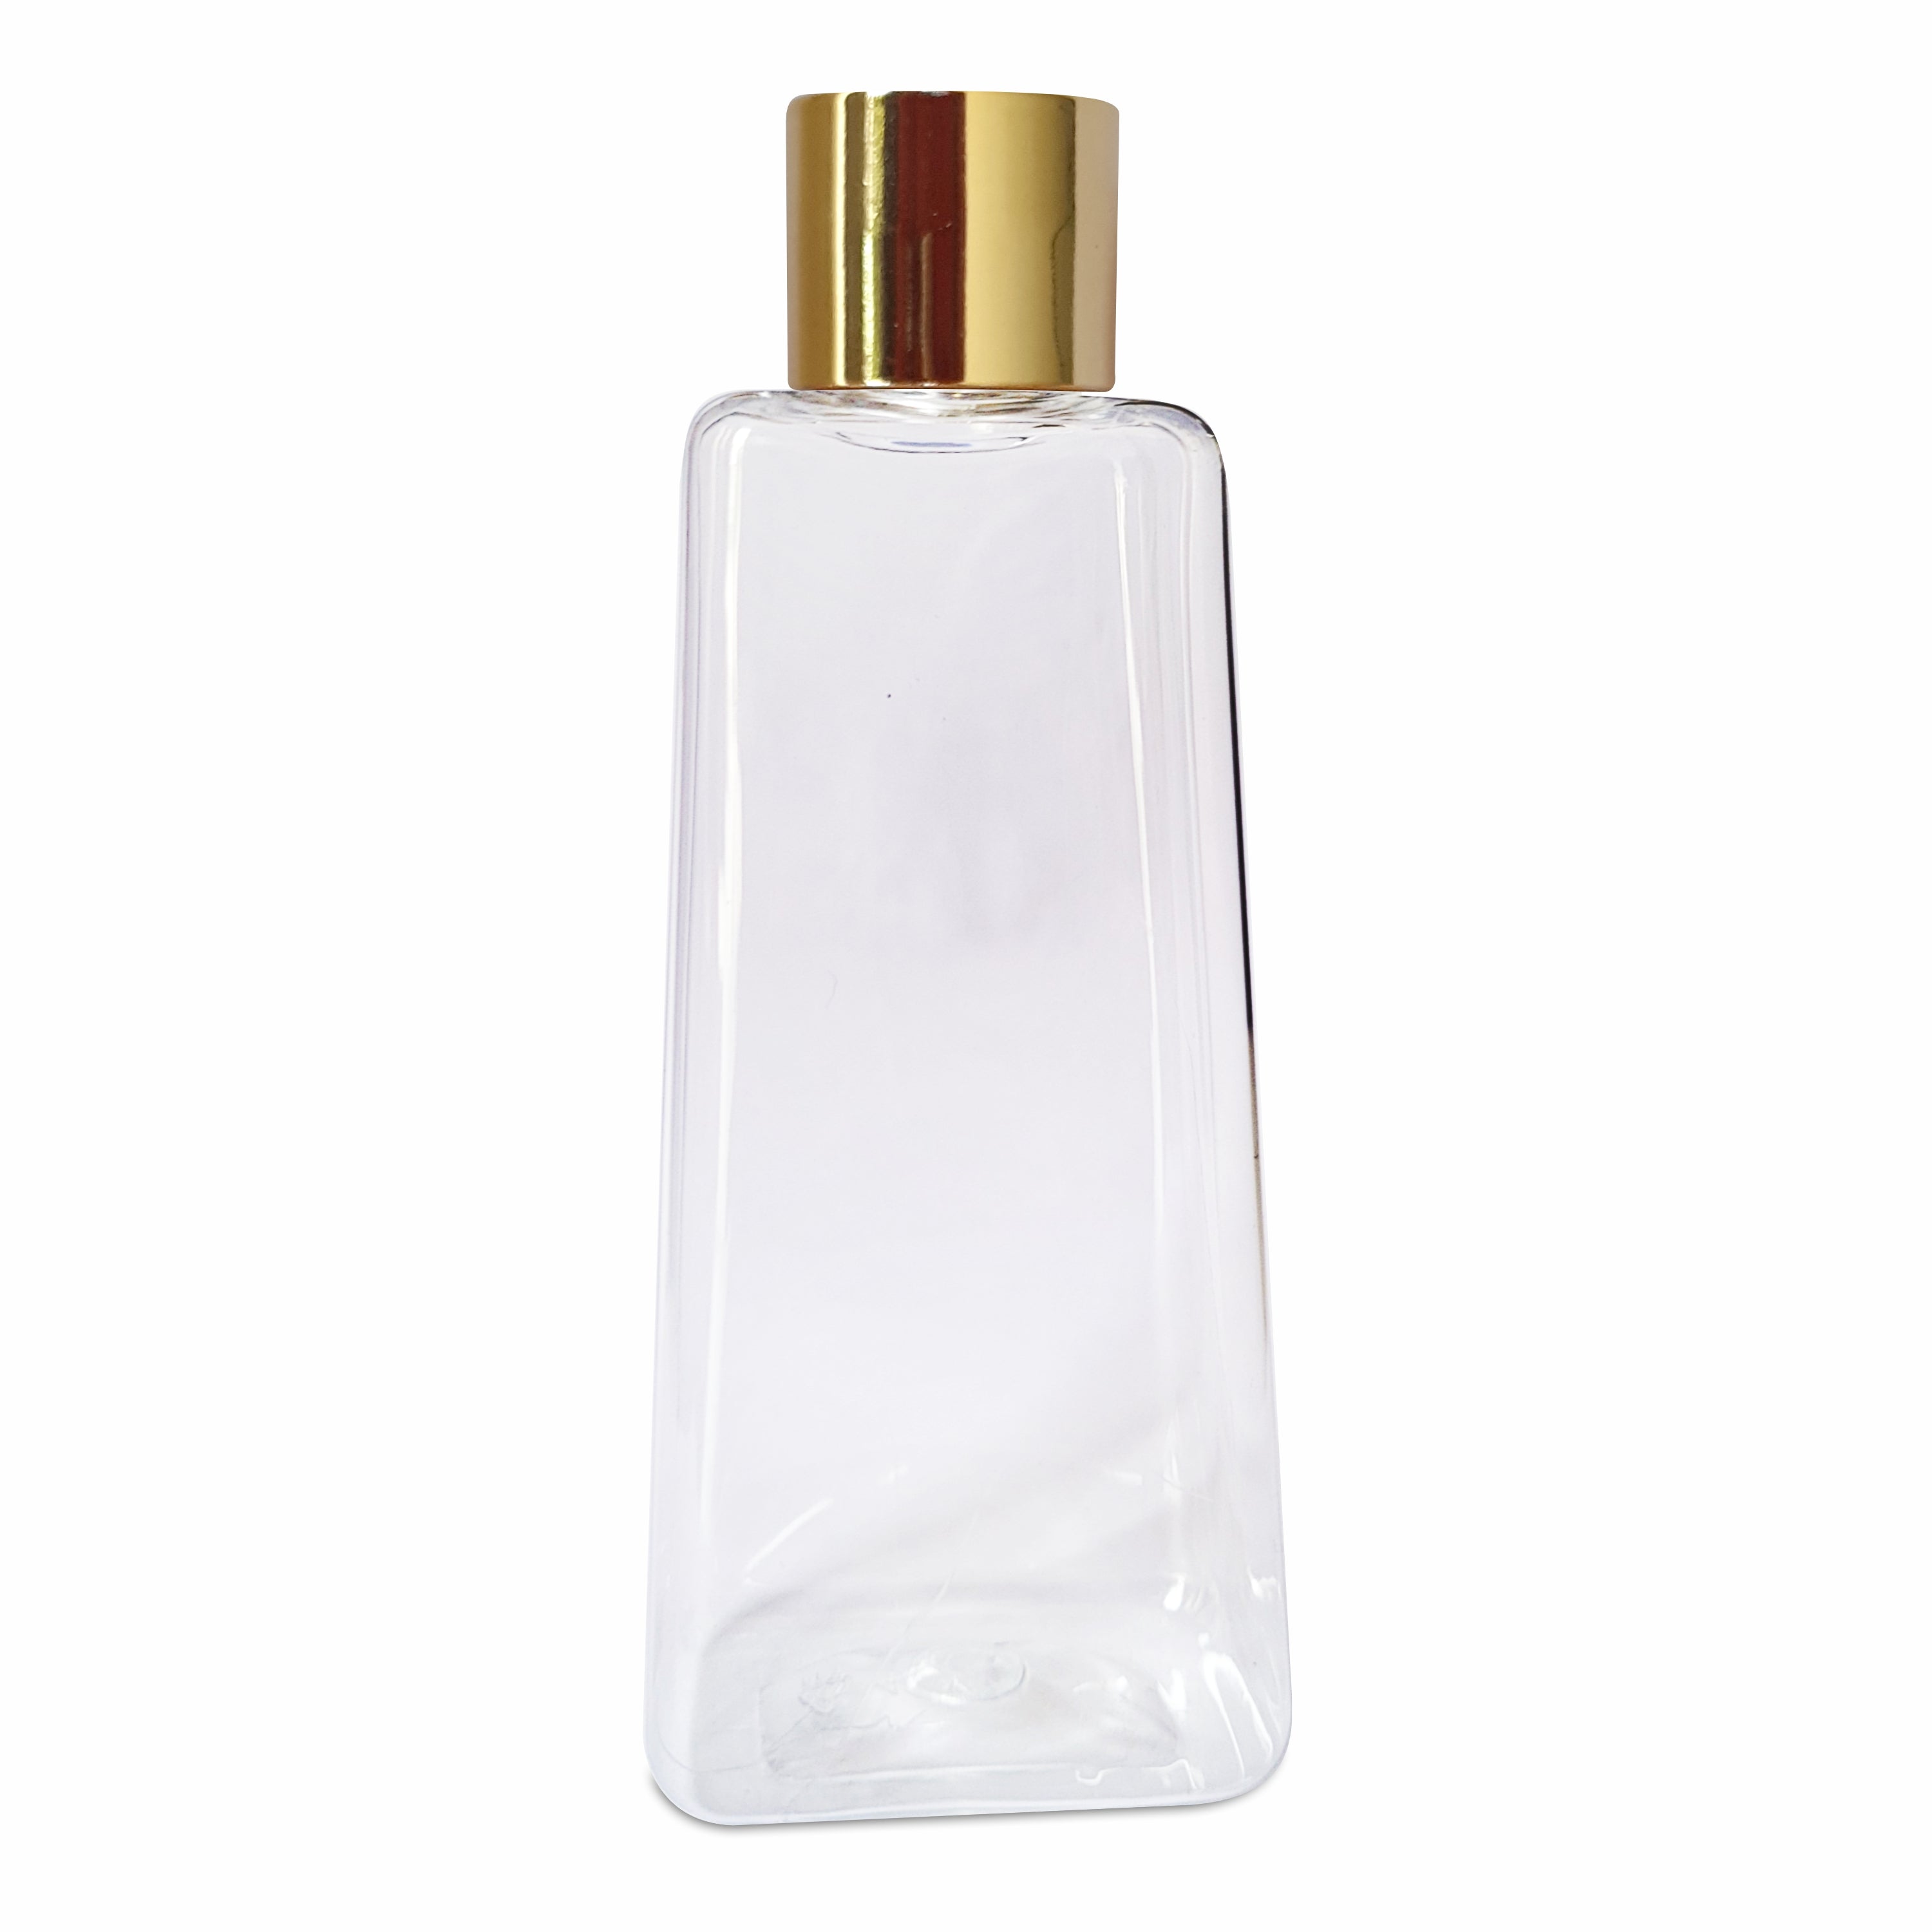 Pyramid Shape Clear Transparent Pet Bottle With Gold Plated Screw Cap 100ml [ZMT89]